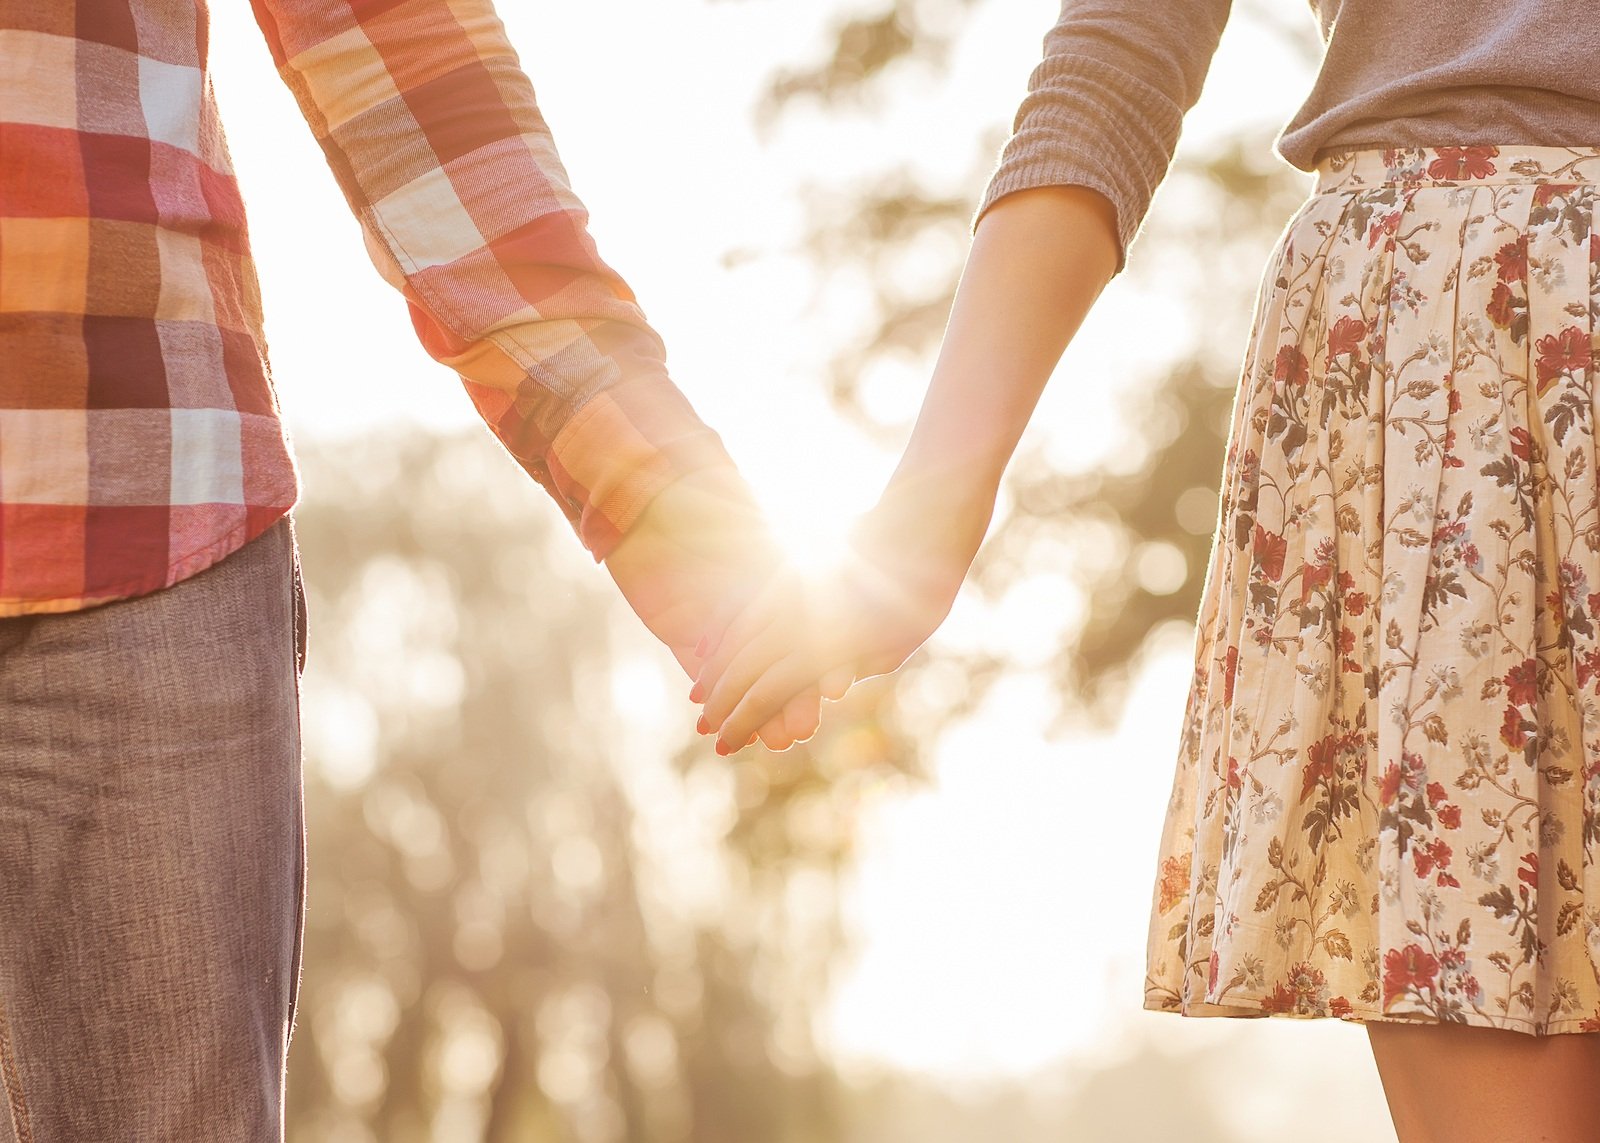 How to Make Your Relationship Strong and Last Longer